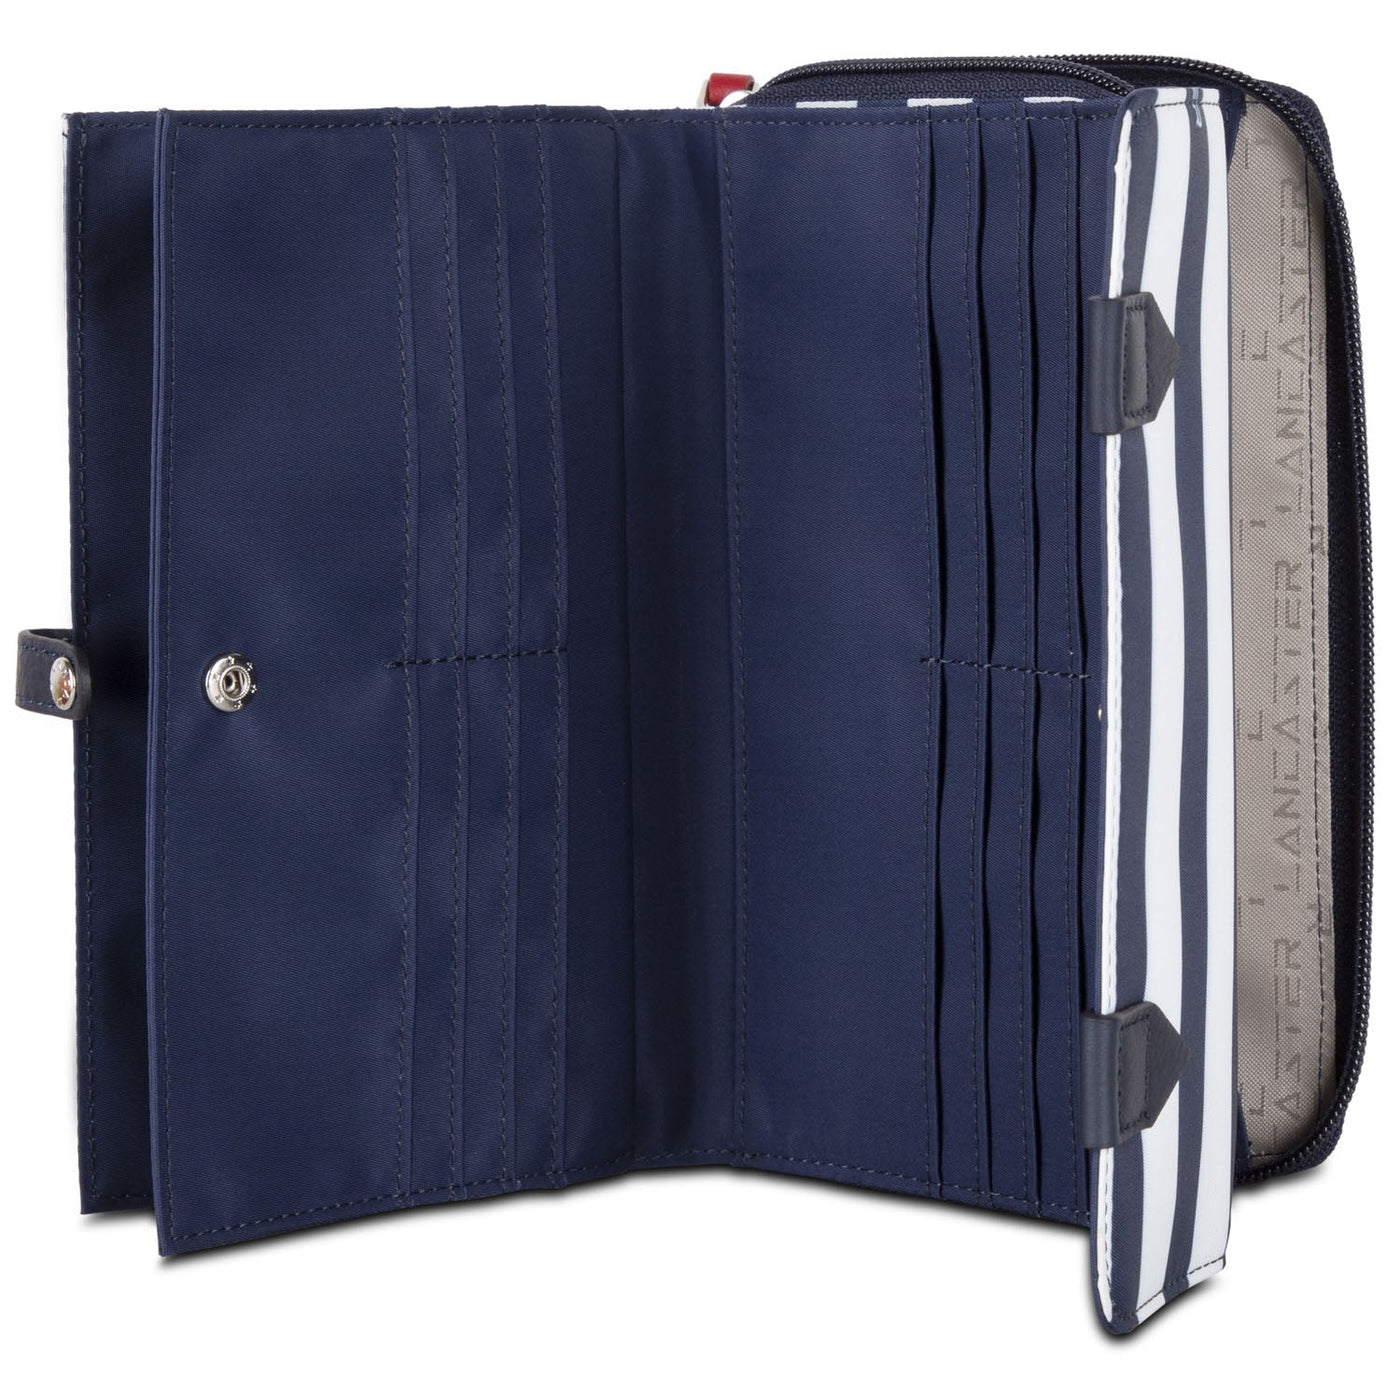 back to back organizer wallet - basic sport #couleur_marinire